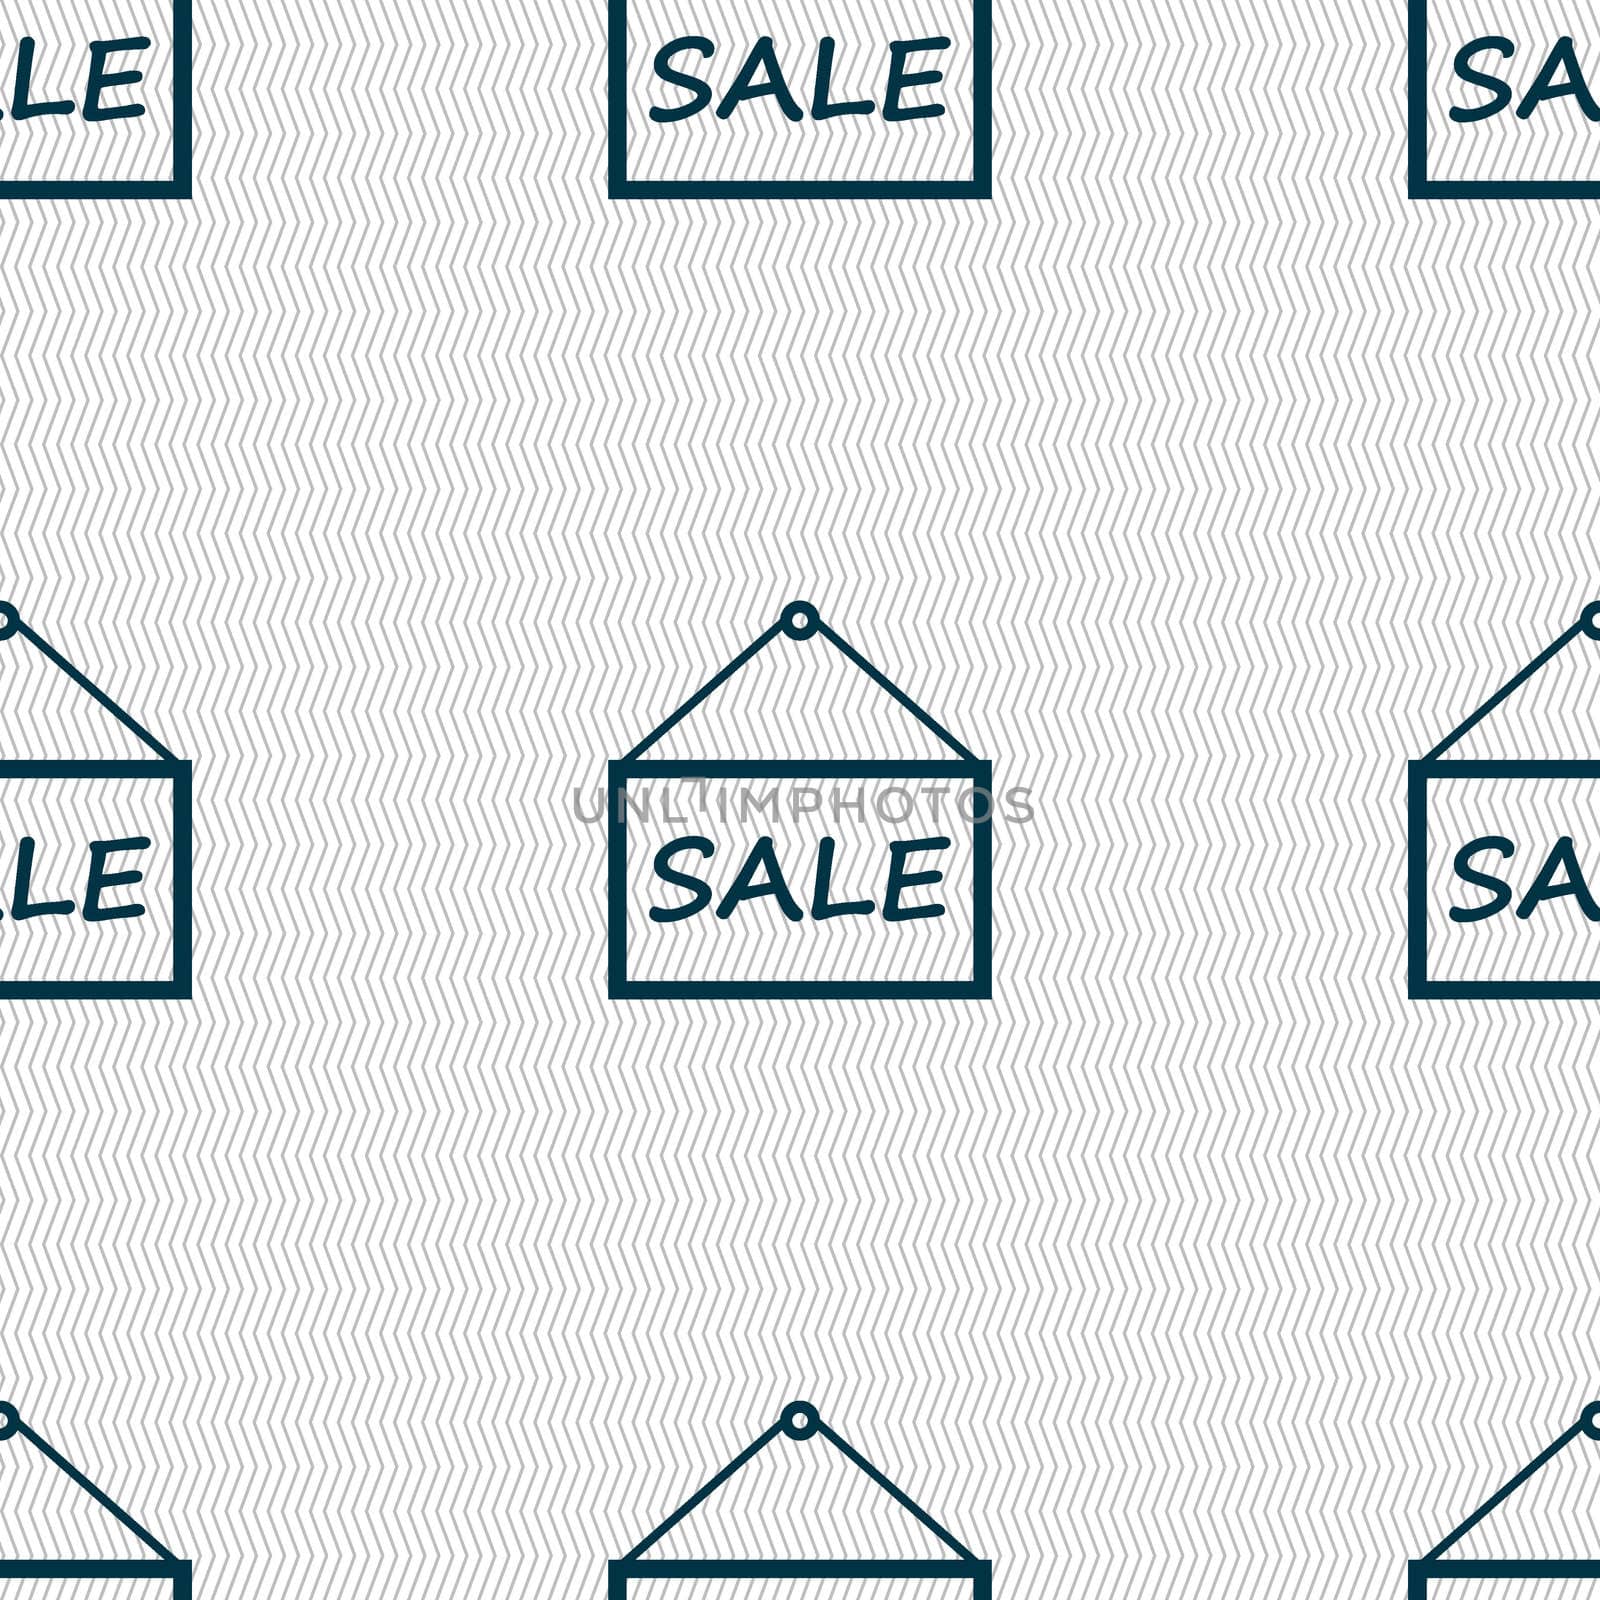 SALE tag icon sign. Seamless abstract background with geometric shapes. illustration